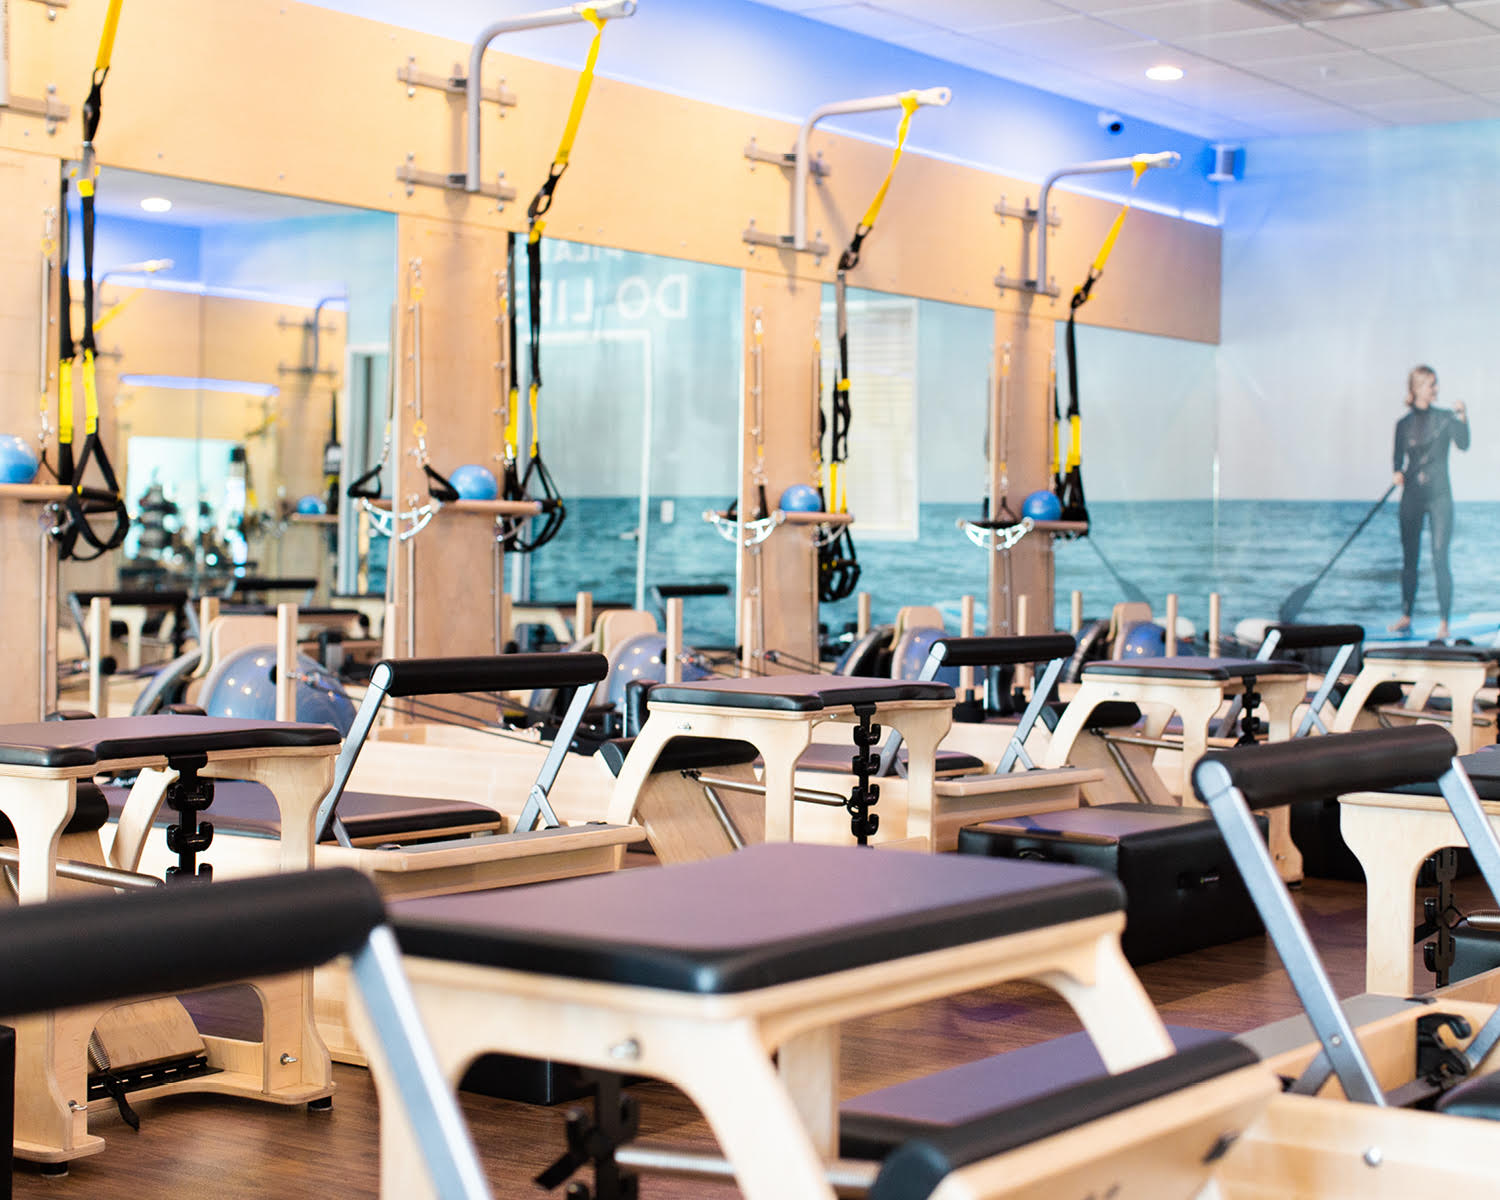 Club Pilates Kicks Off New Year with Deal to Bring 50 New Studios